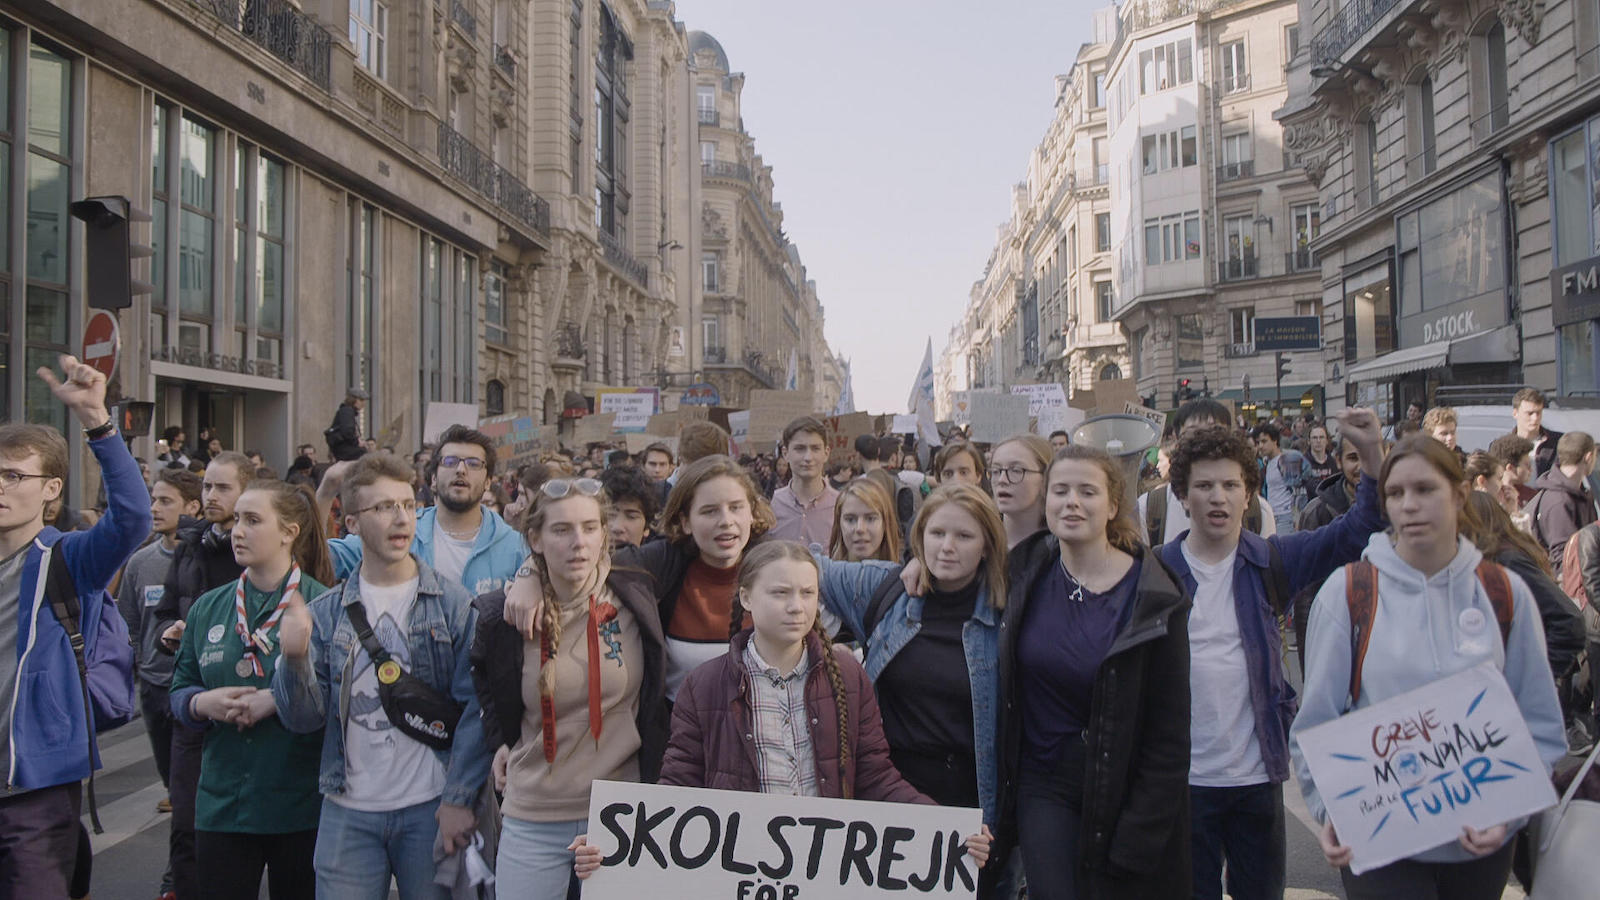 Greta Thunberg marches with fellow youth activists.